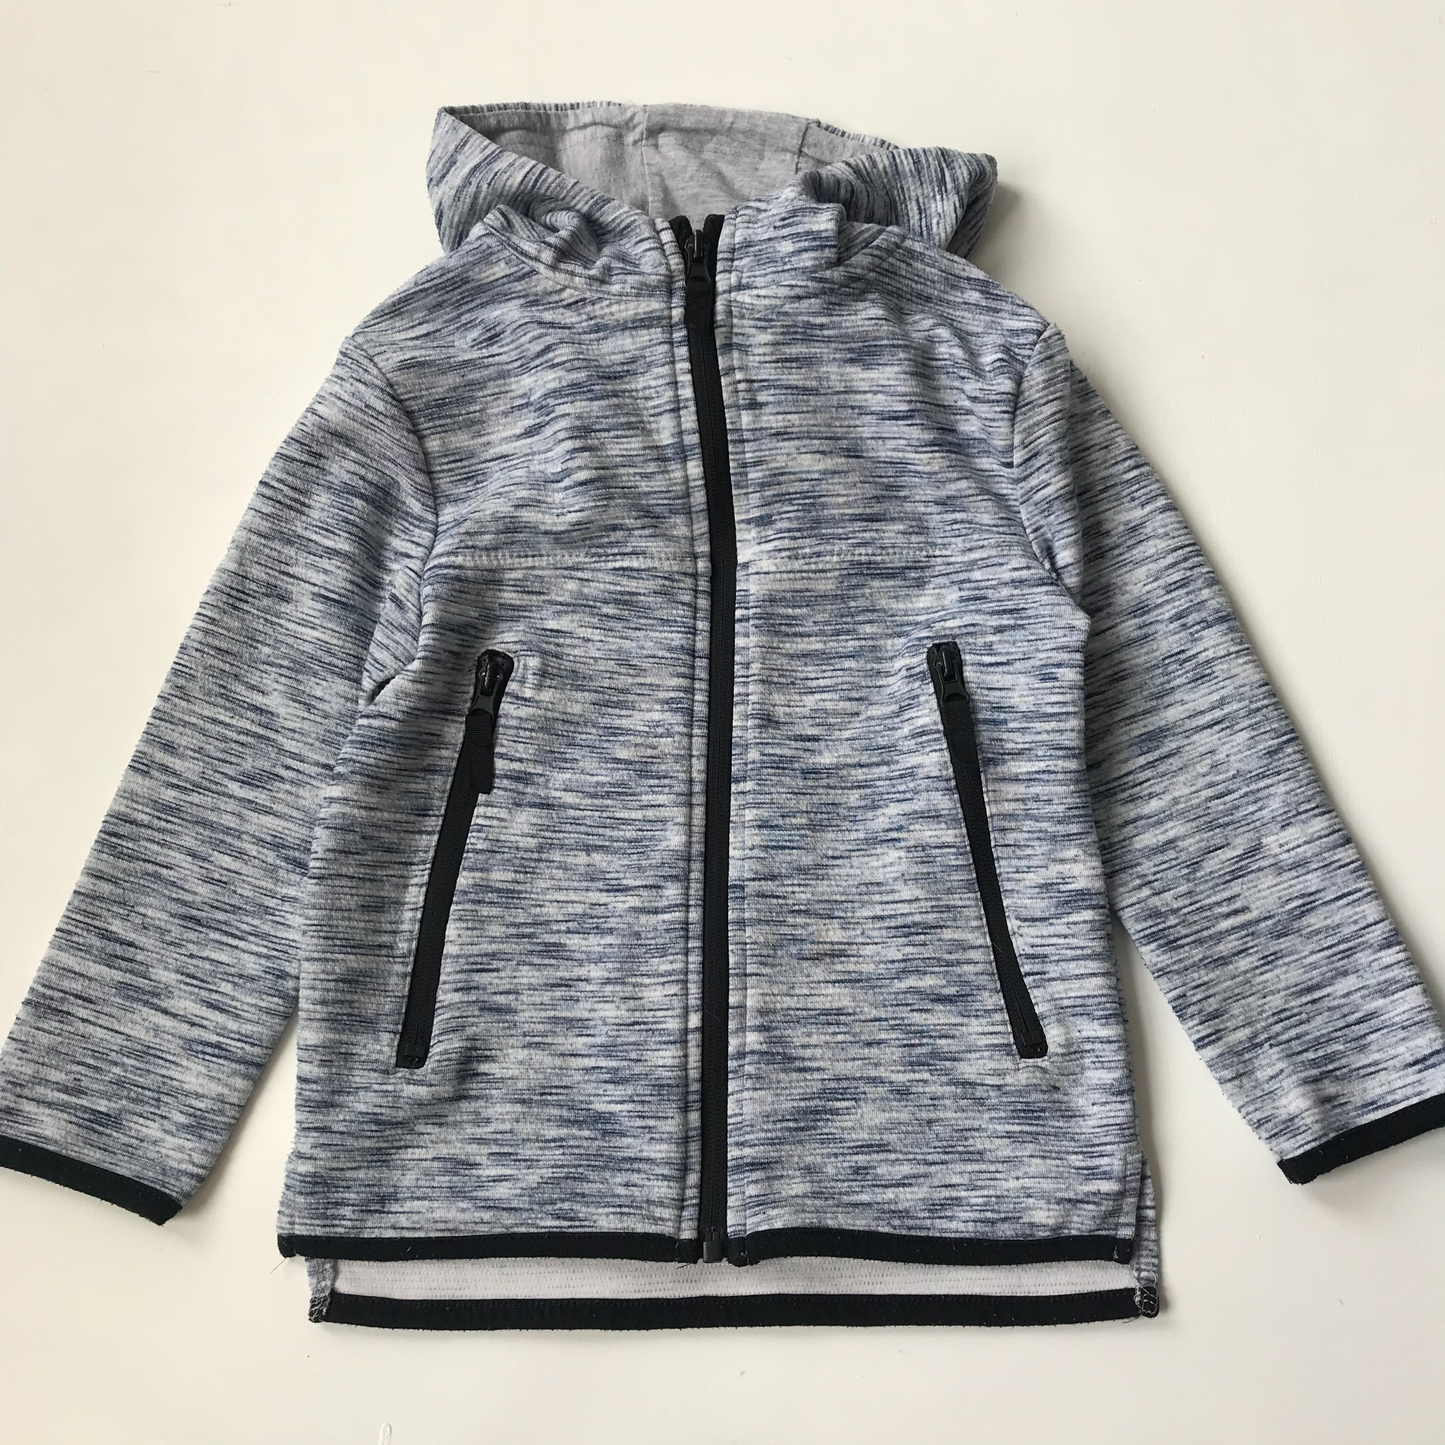 Hoodie -Blue & Grey with Zipper - Age 4